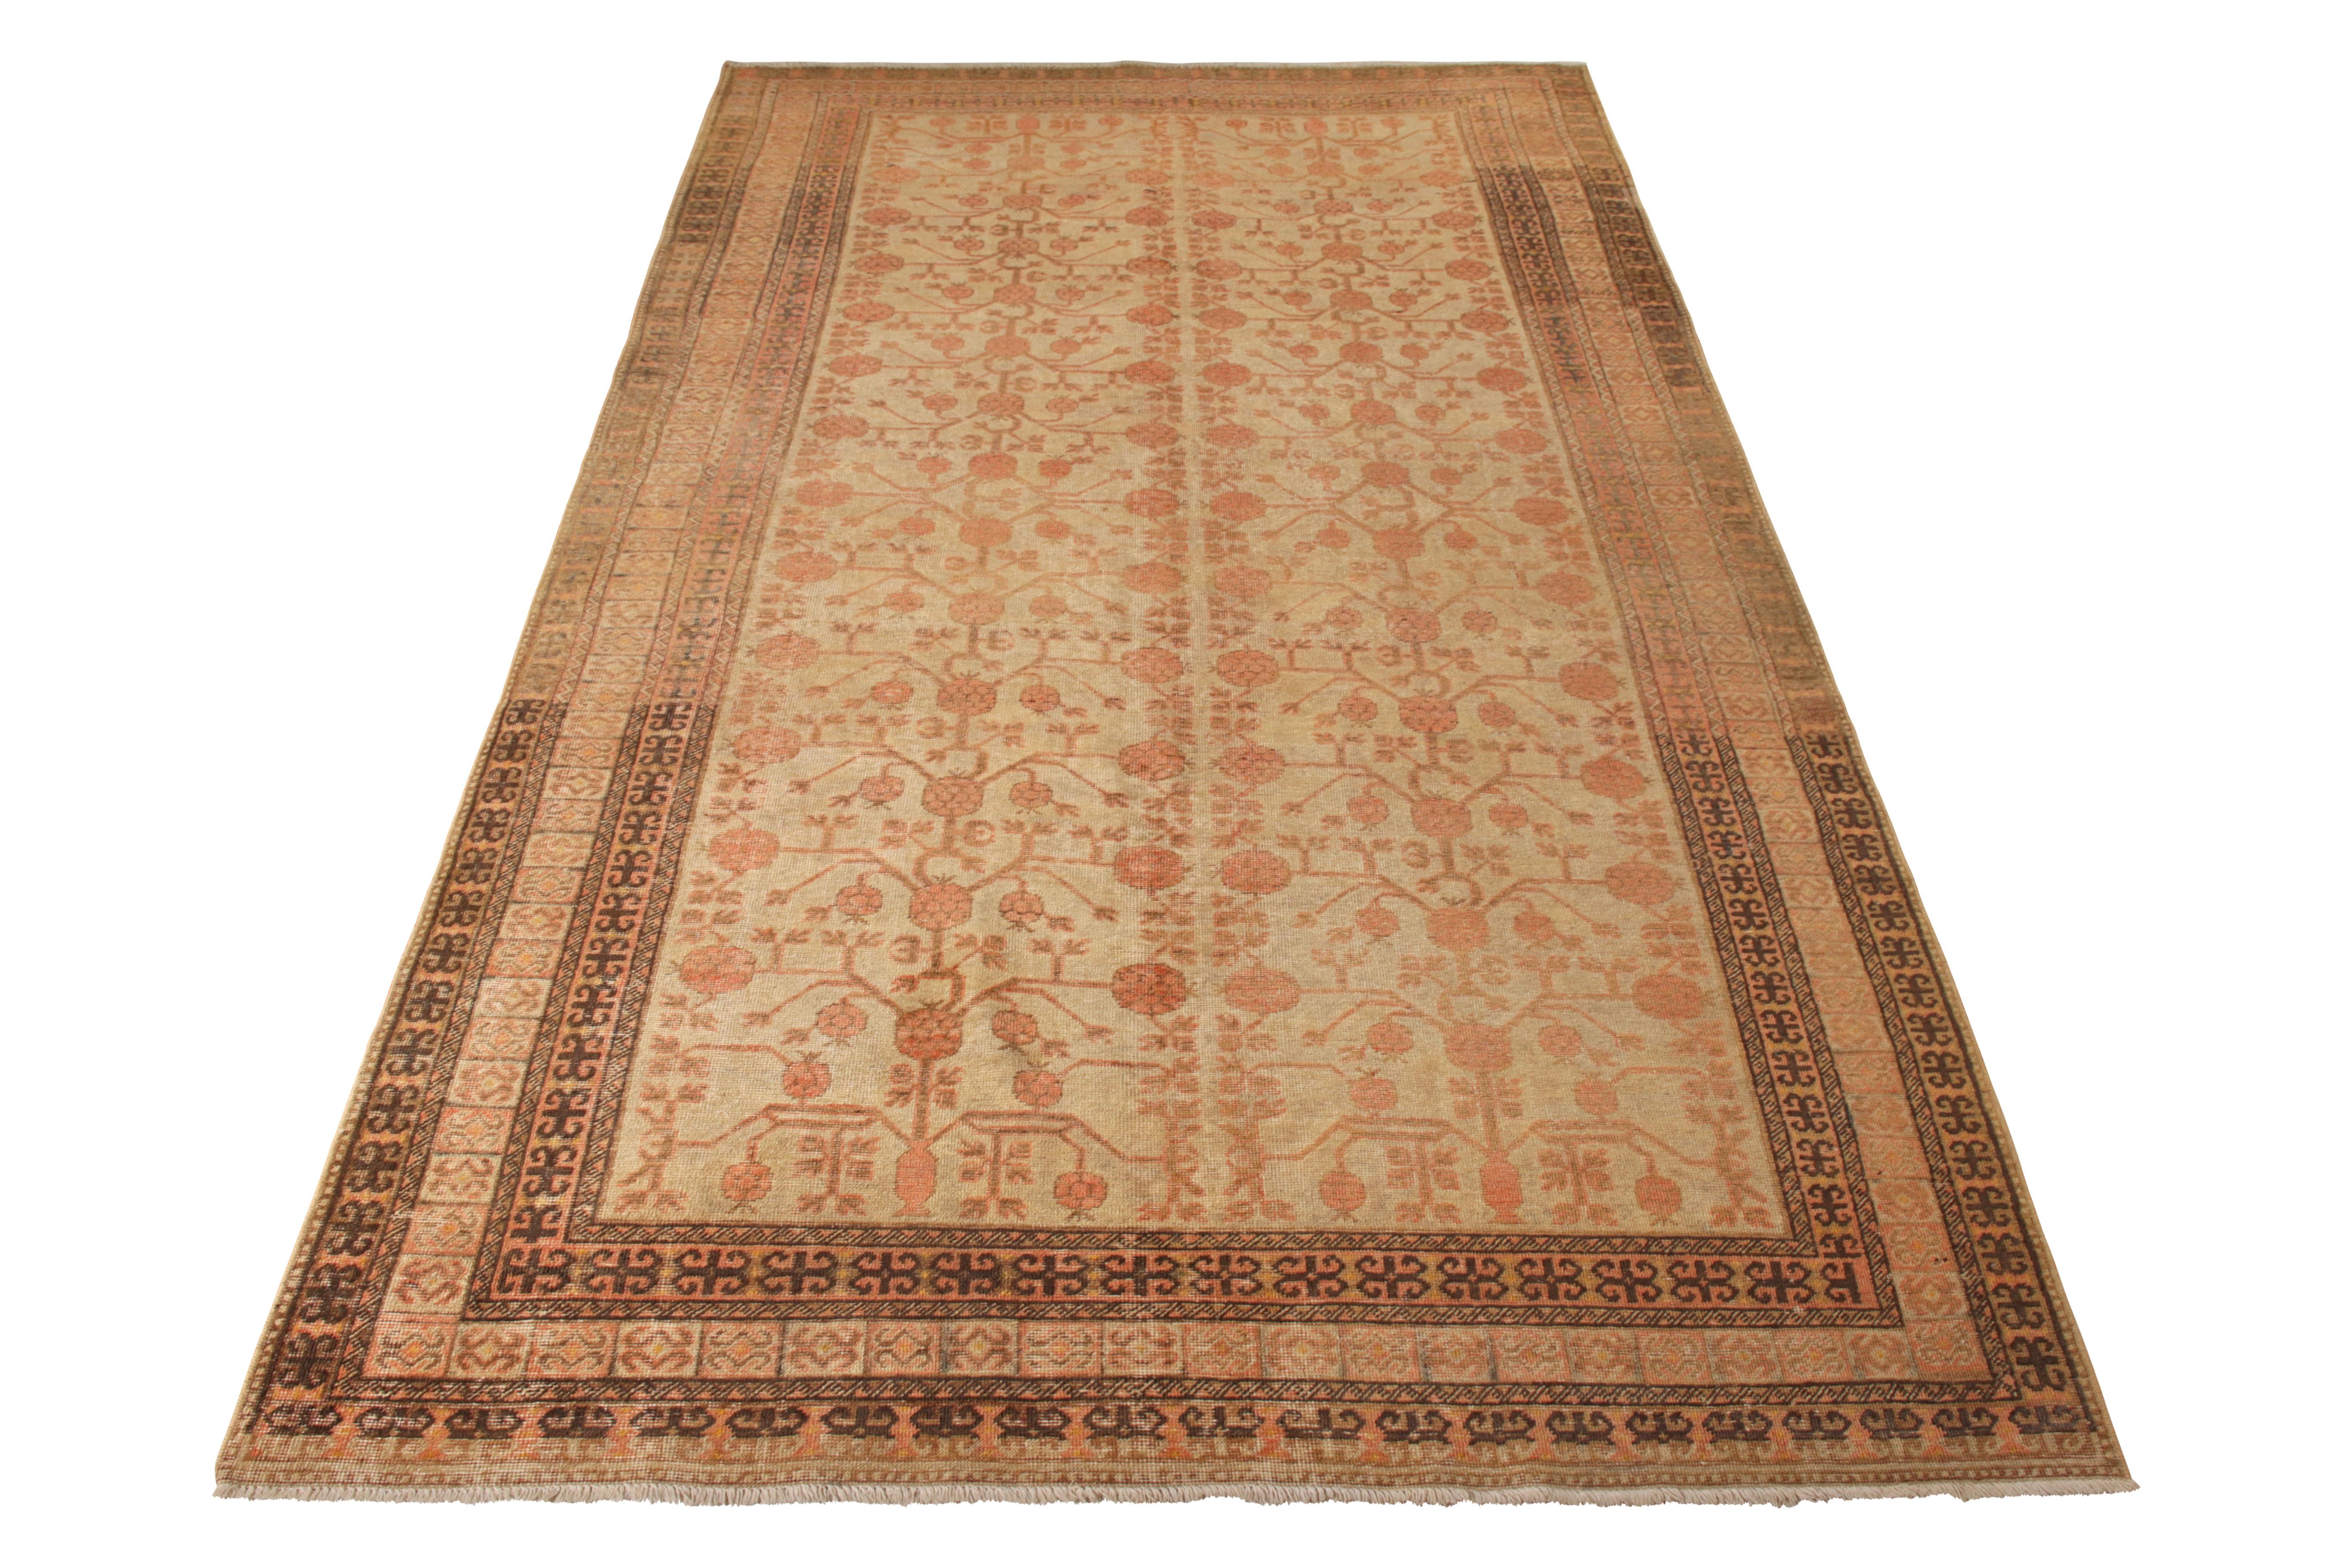 East Turkestani Hand-Knotted Antique Khotan Rug in Green Pomegranate Pattern by Rug & Kilim